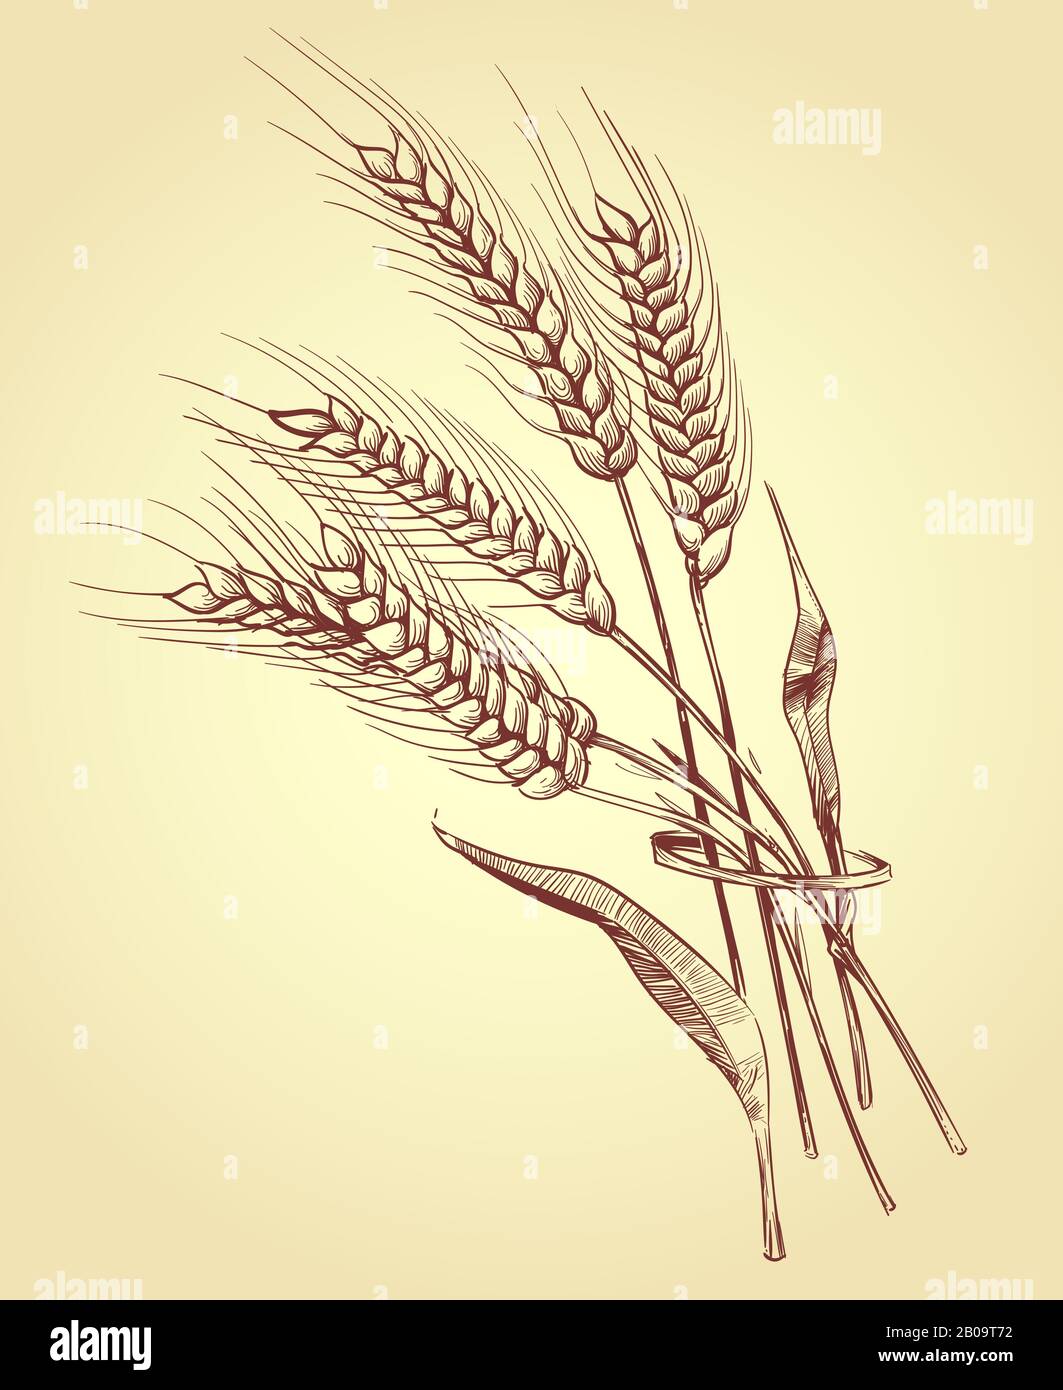 Hand drawn ears of wheat with grains, bakery sketch vector illustration. Wheat sheaf harvest Stock Vector